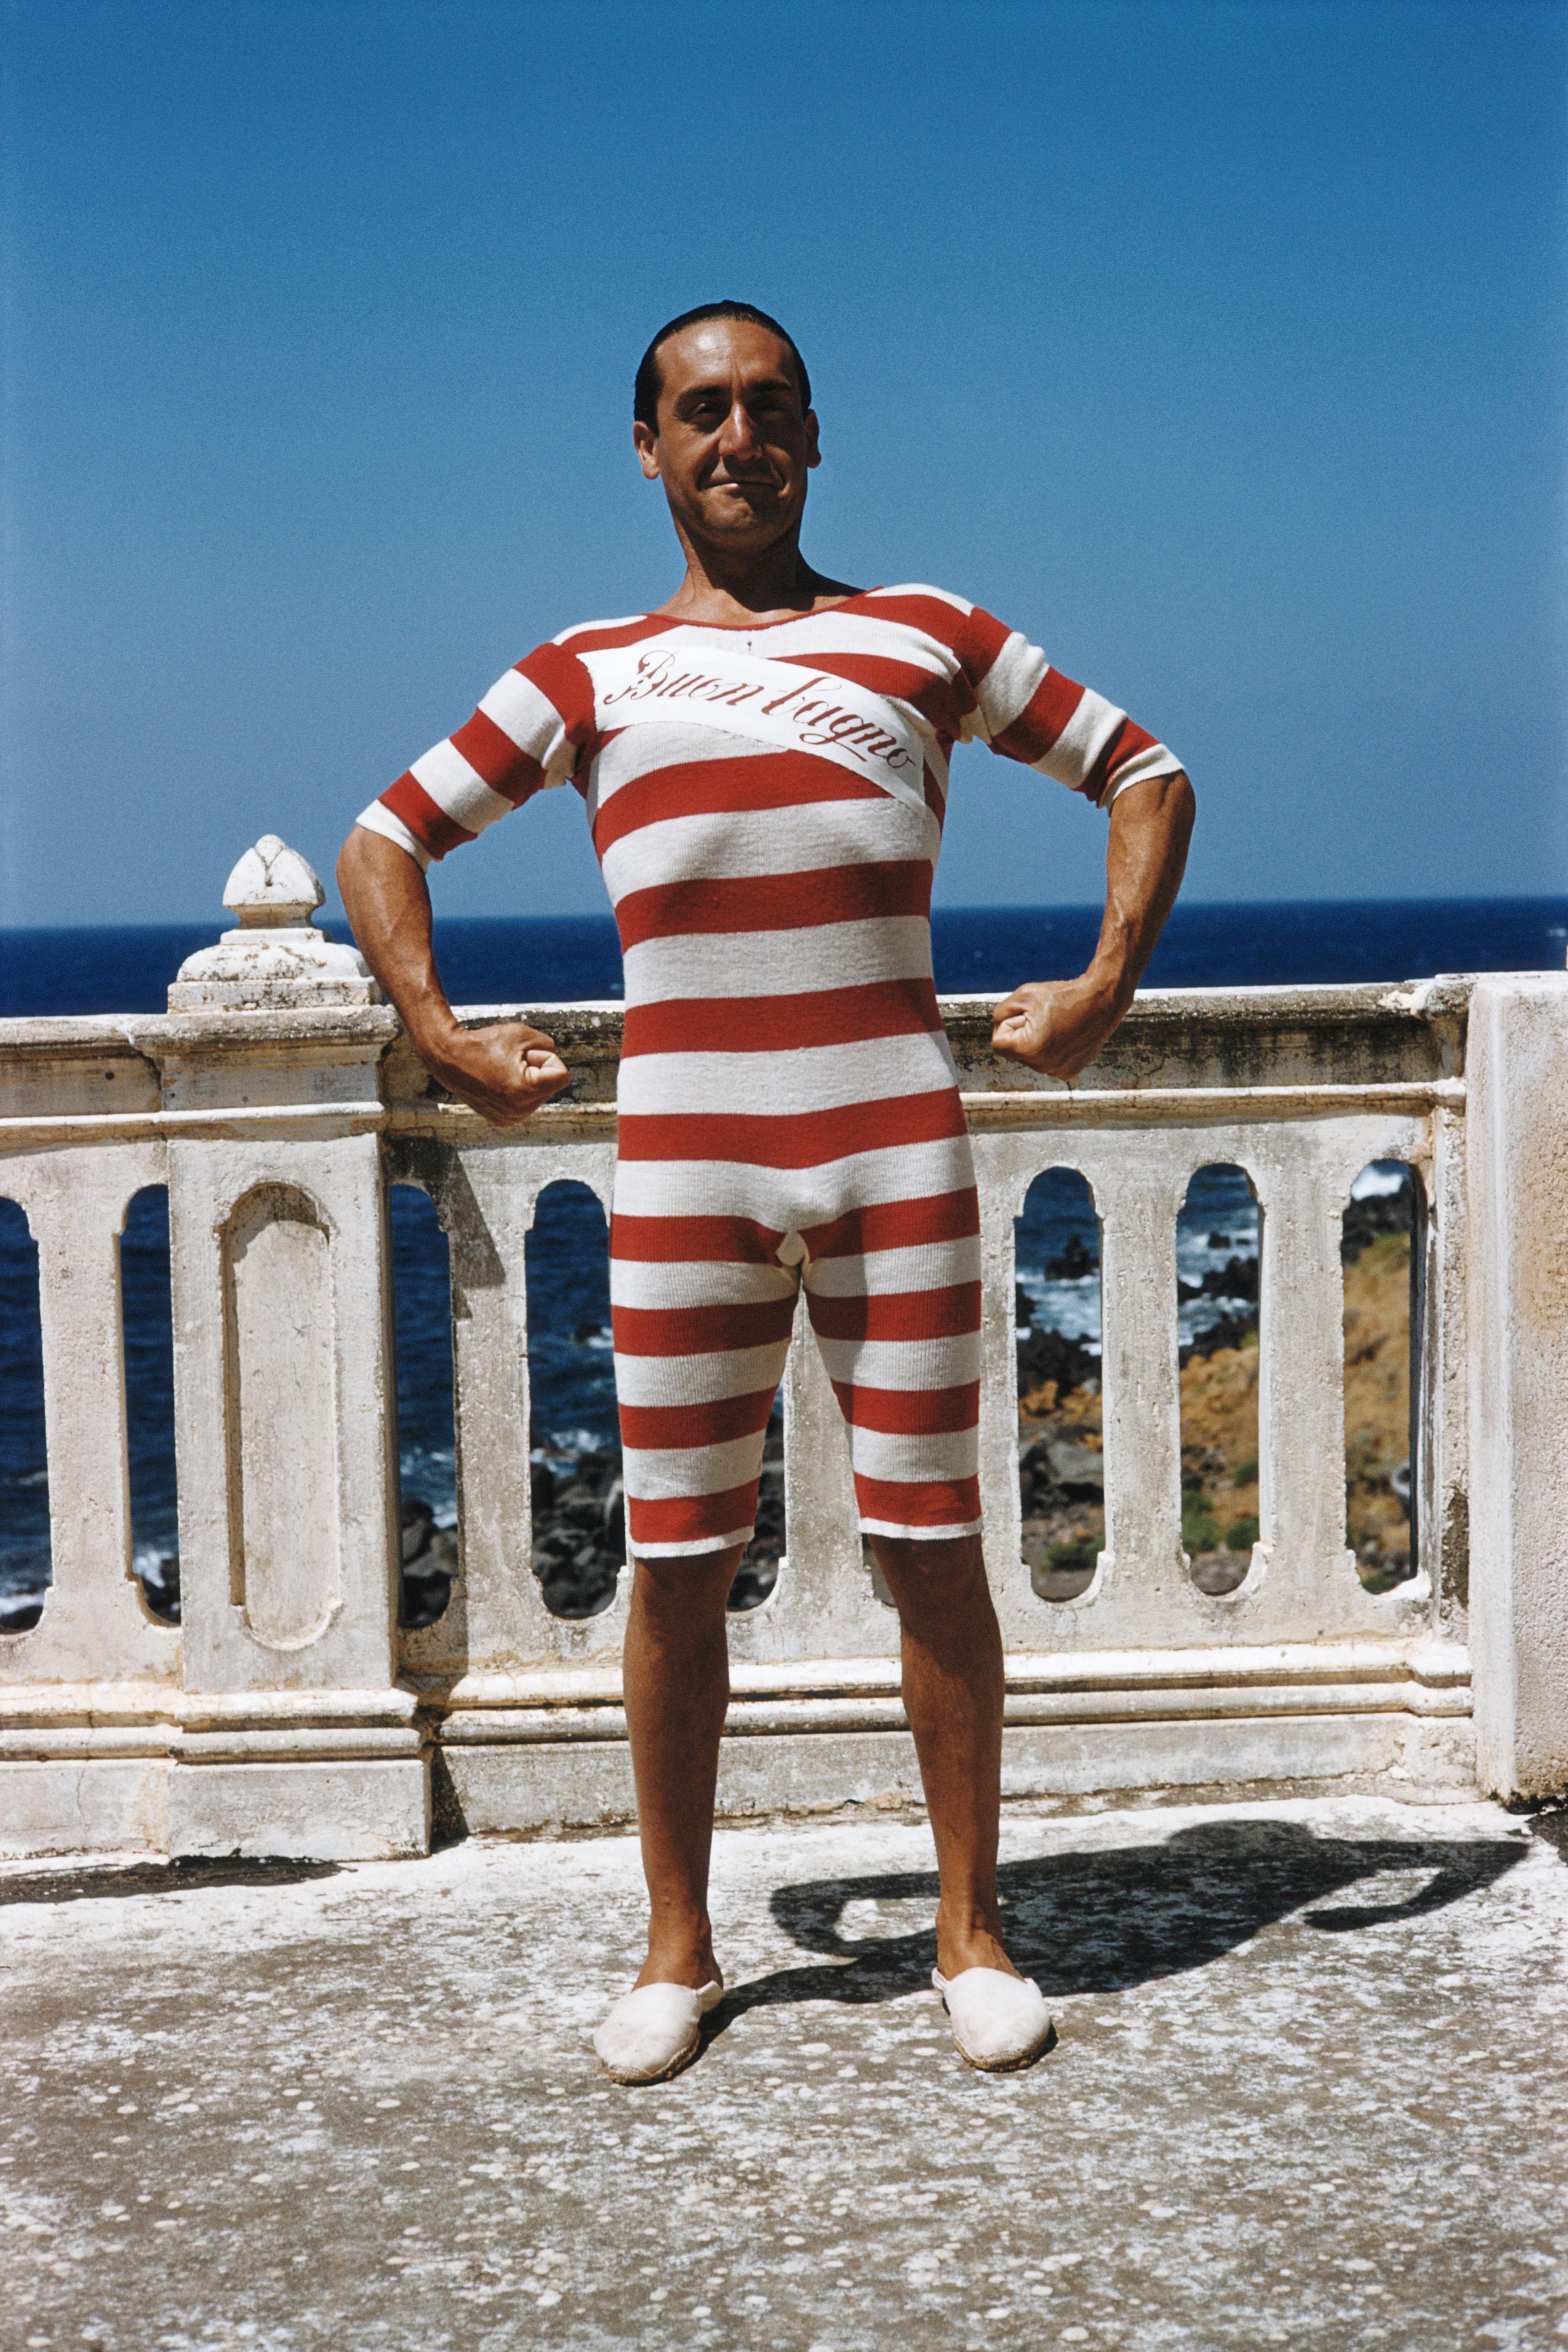 Slim Aarons
Professor Mario Sposito
1973
Chromogenic Lambda Print
Estate stamped and hand numbered edition of 150 with certificate of authenticity from the estate. 

Professor Mario Sposito wearing an old-fashioned red and white striped bathing